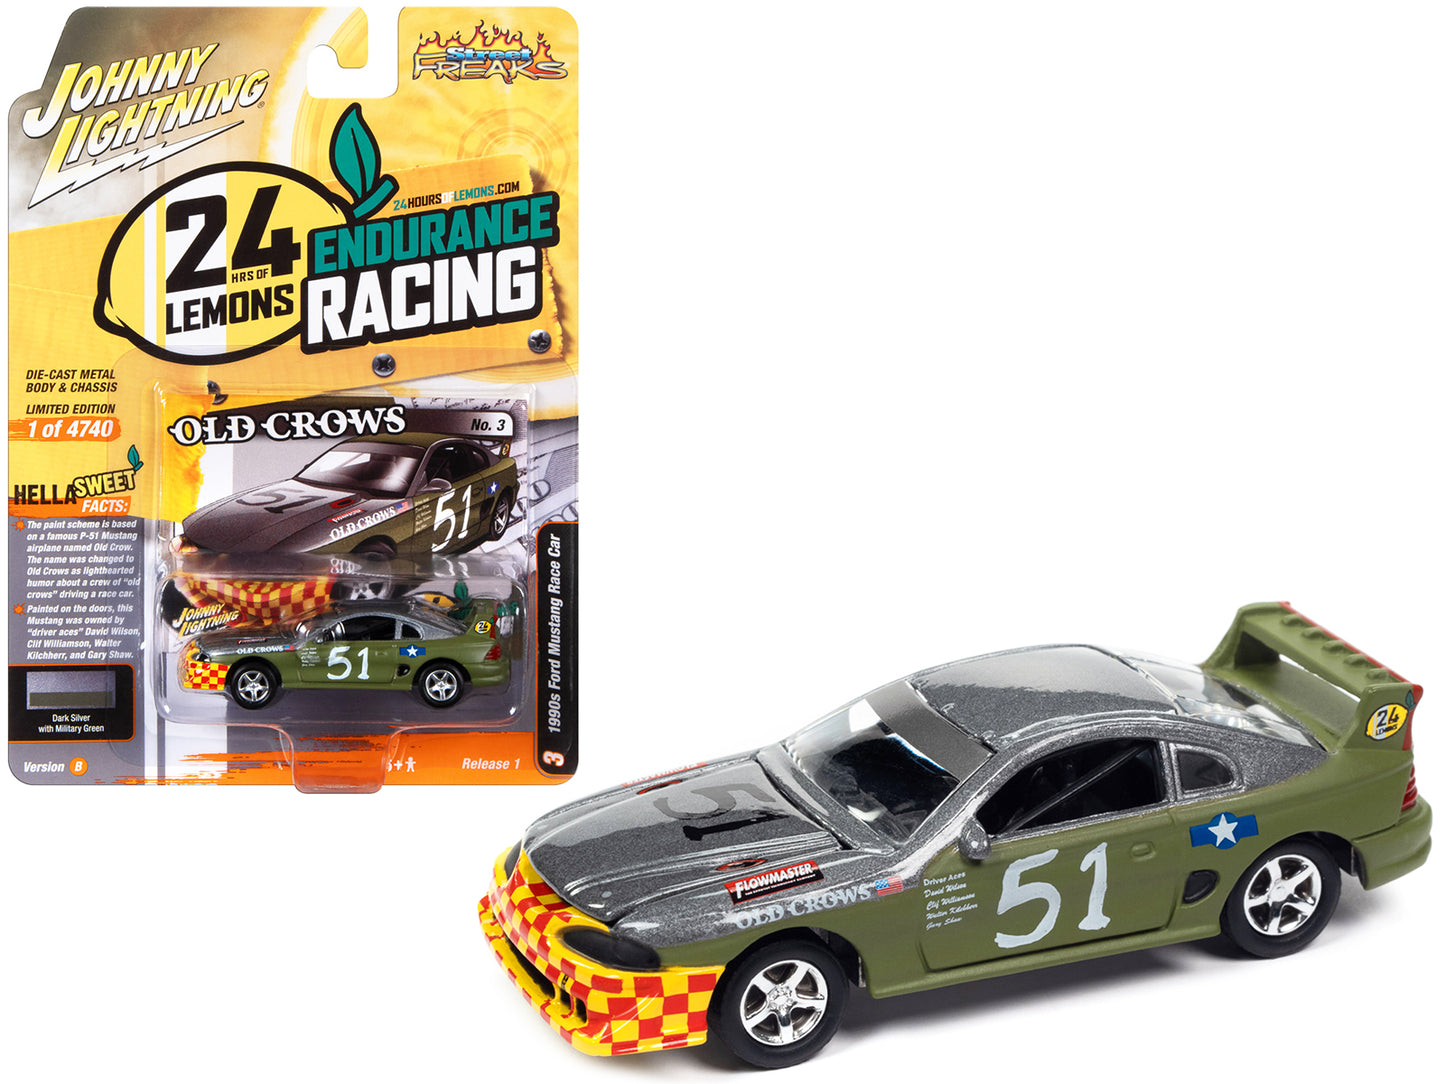 1990s Ford Mustang Race Green Diecast Model Race Car 